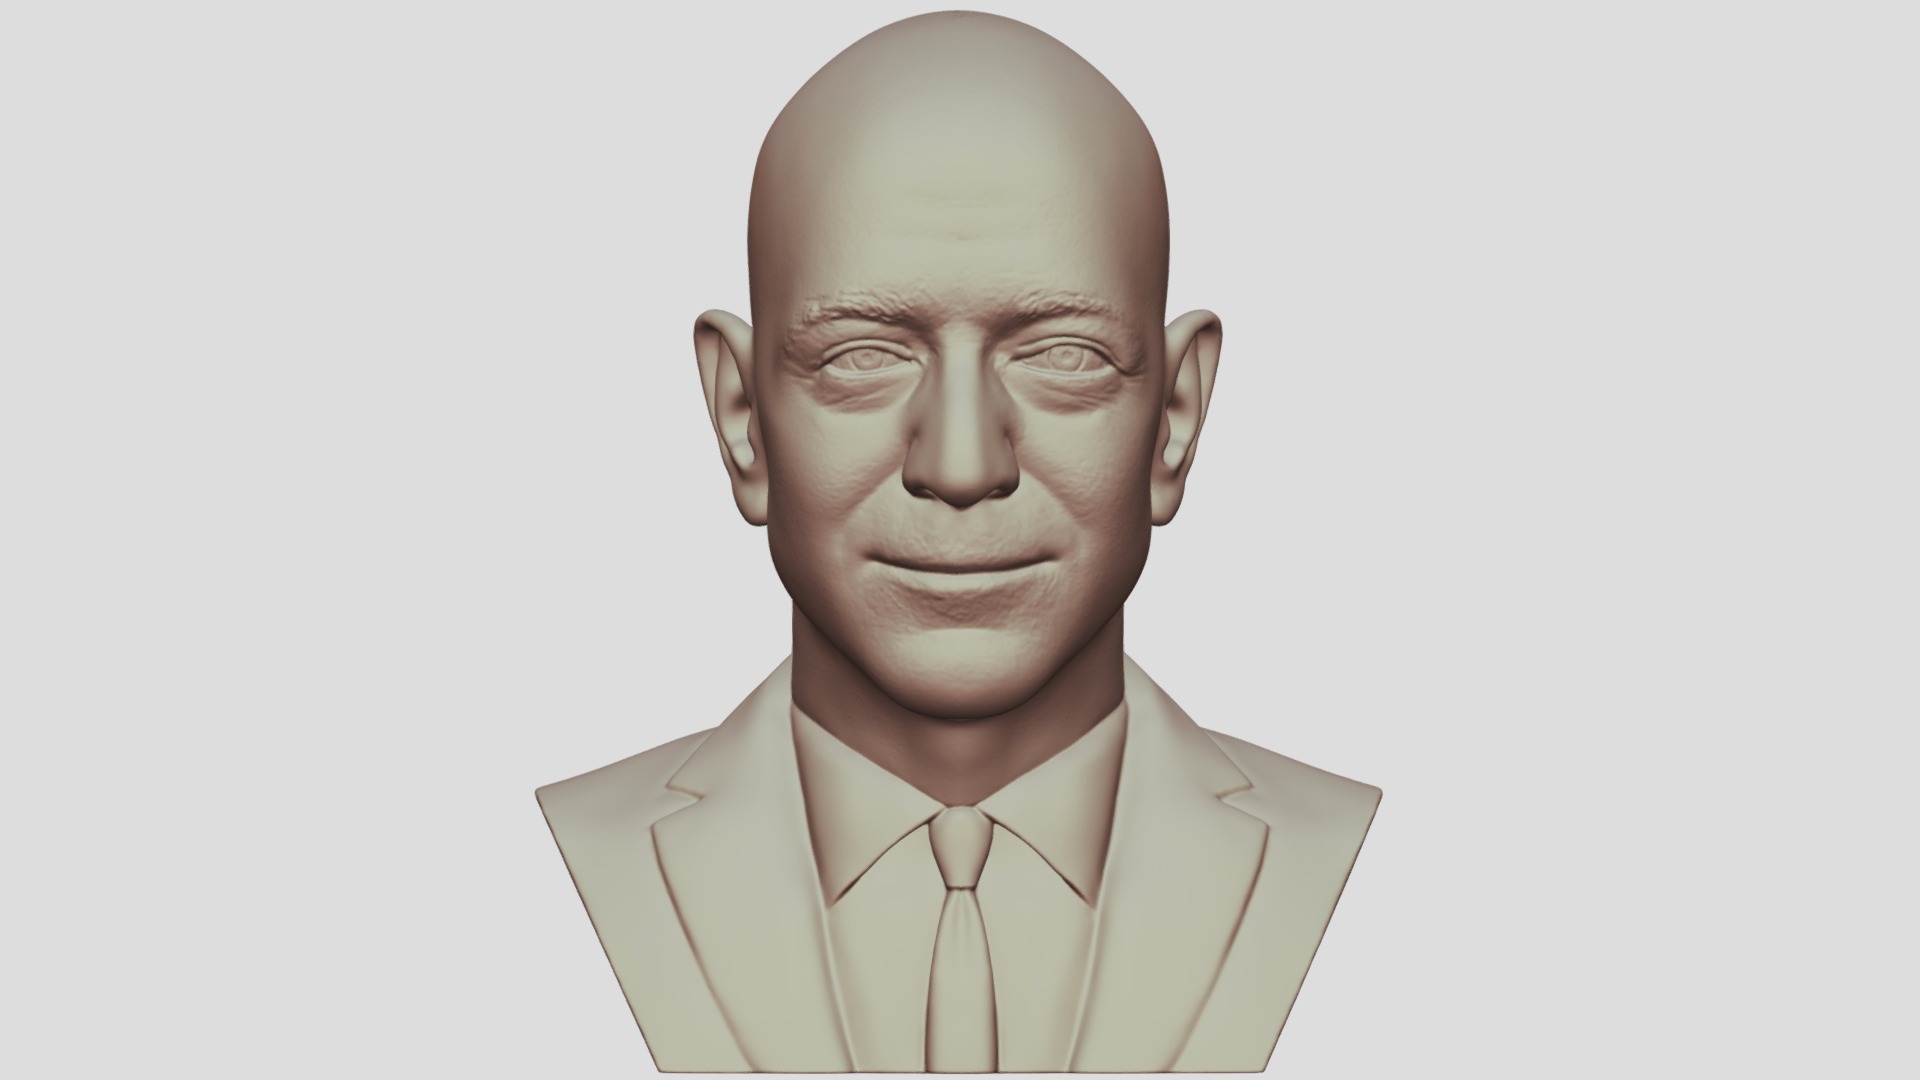 3D model Jeff Bezos bust for 3D printing - This is a 3D model of the Jeff Bezos bust for 3D printing. The 3D model is about a man with a large forehead.